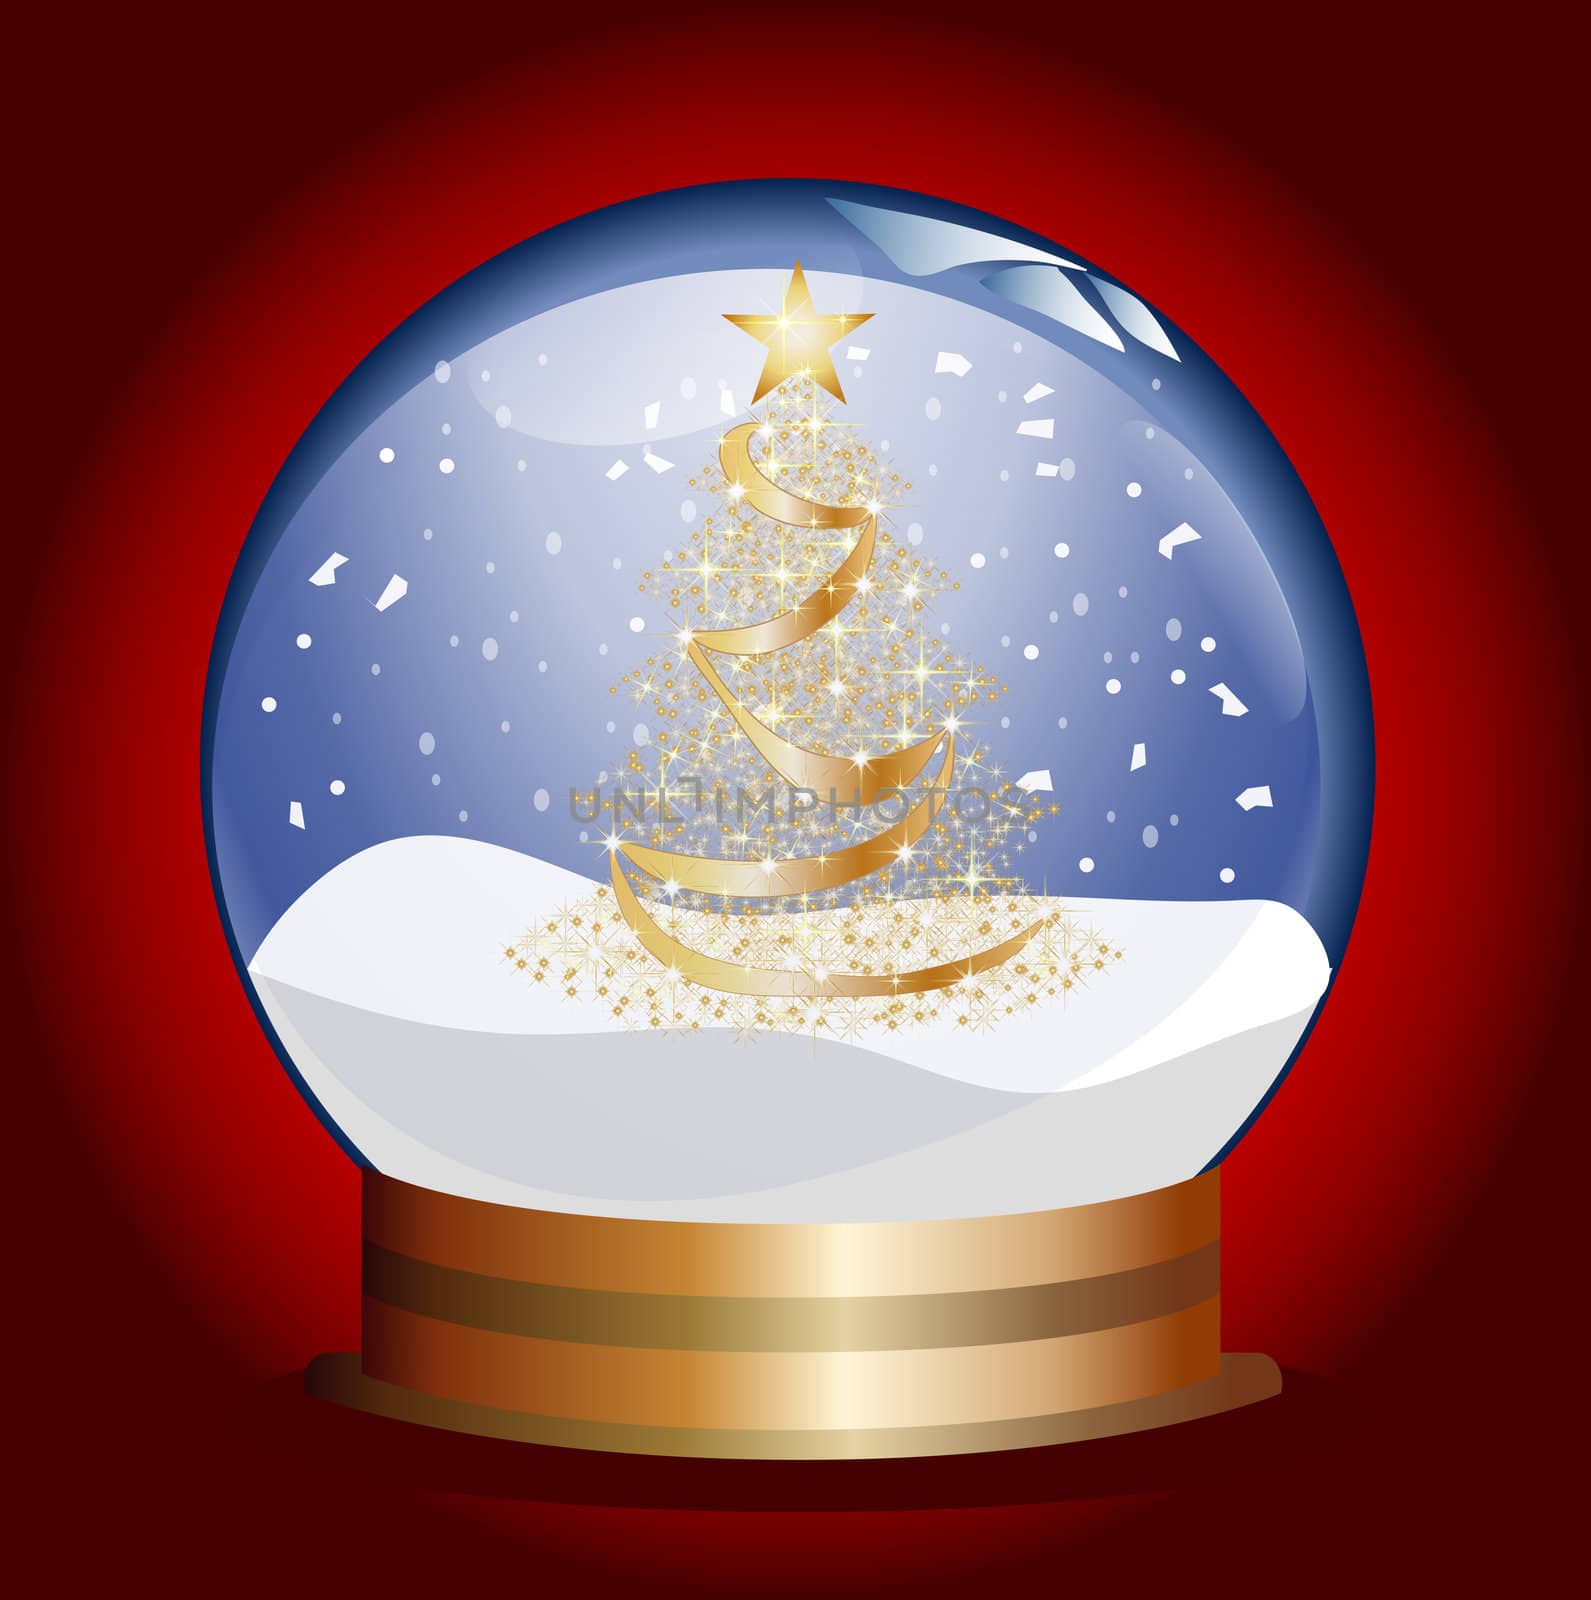 snowglobe with golden christmas tree by peromarketing